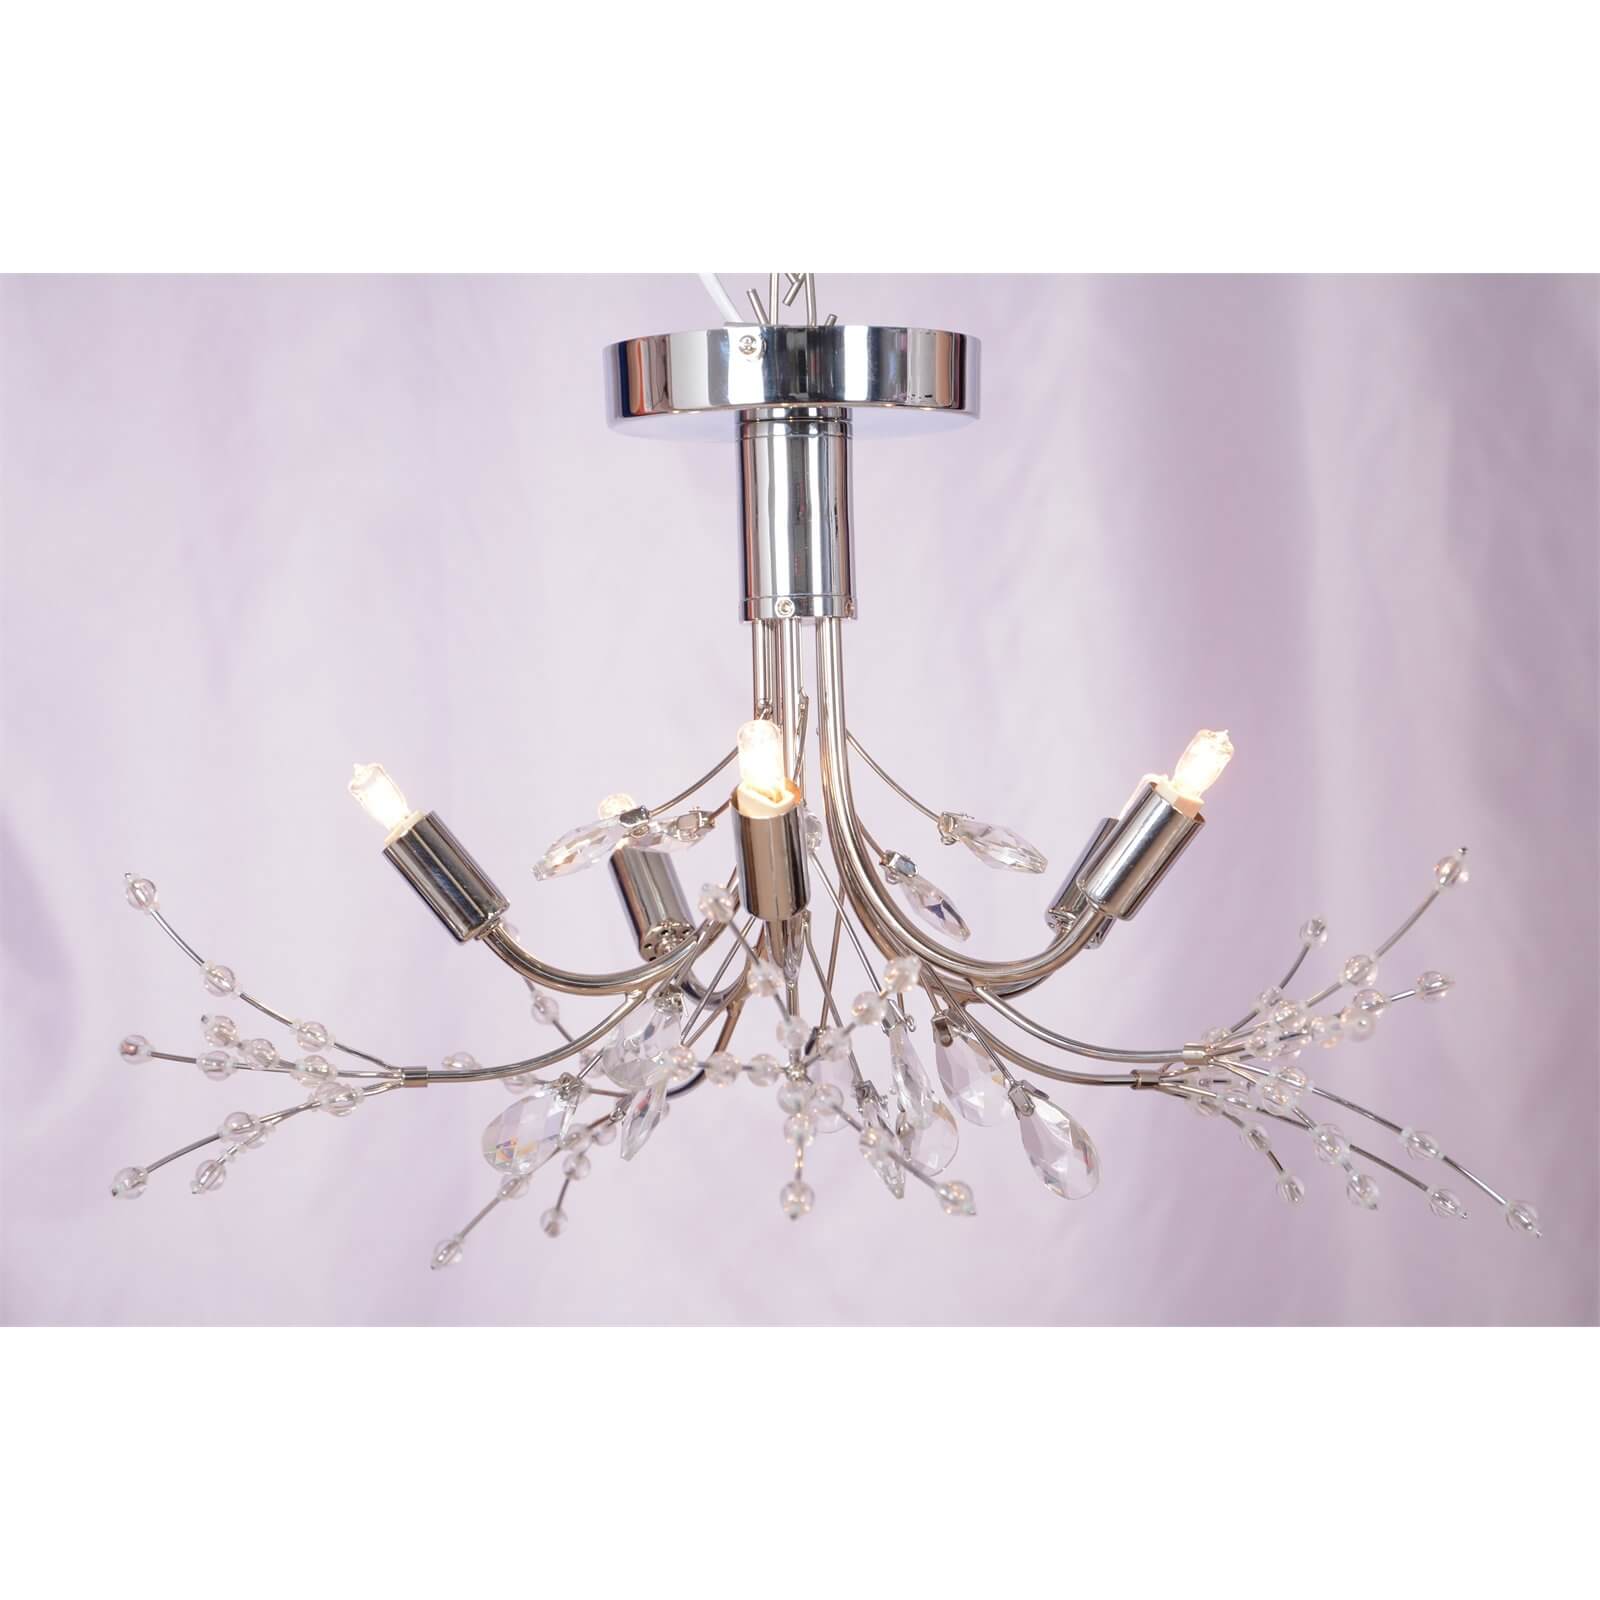 Gin Gin 5 Light Beaded Pendant Light - Chrome and Clear